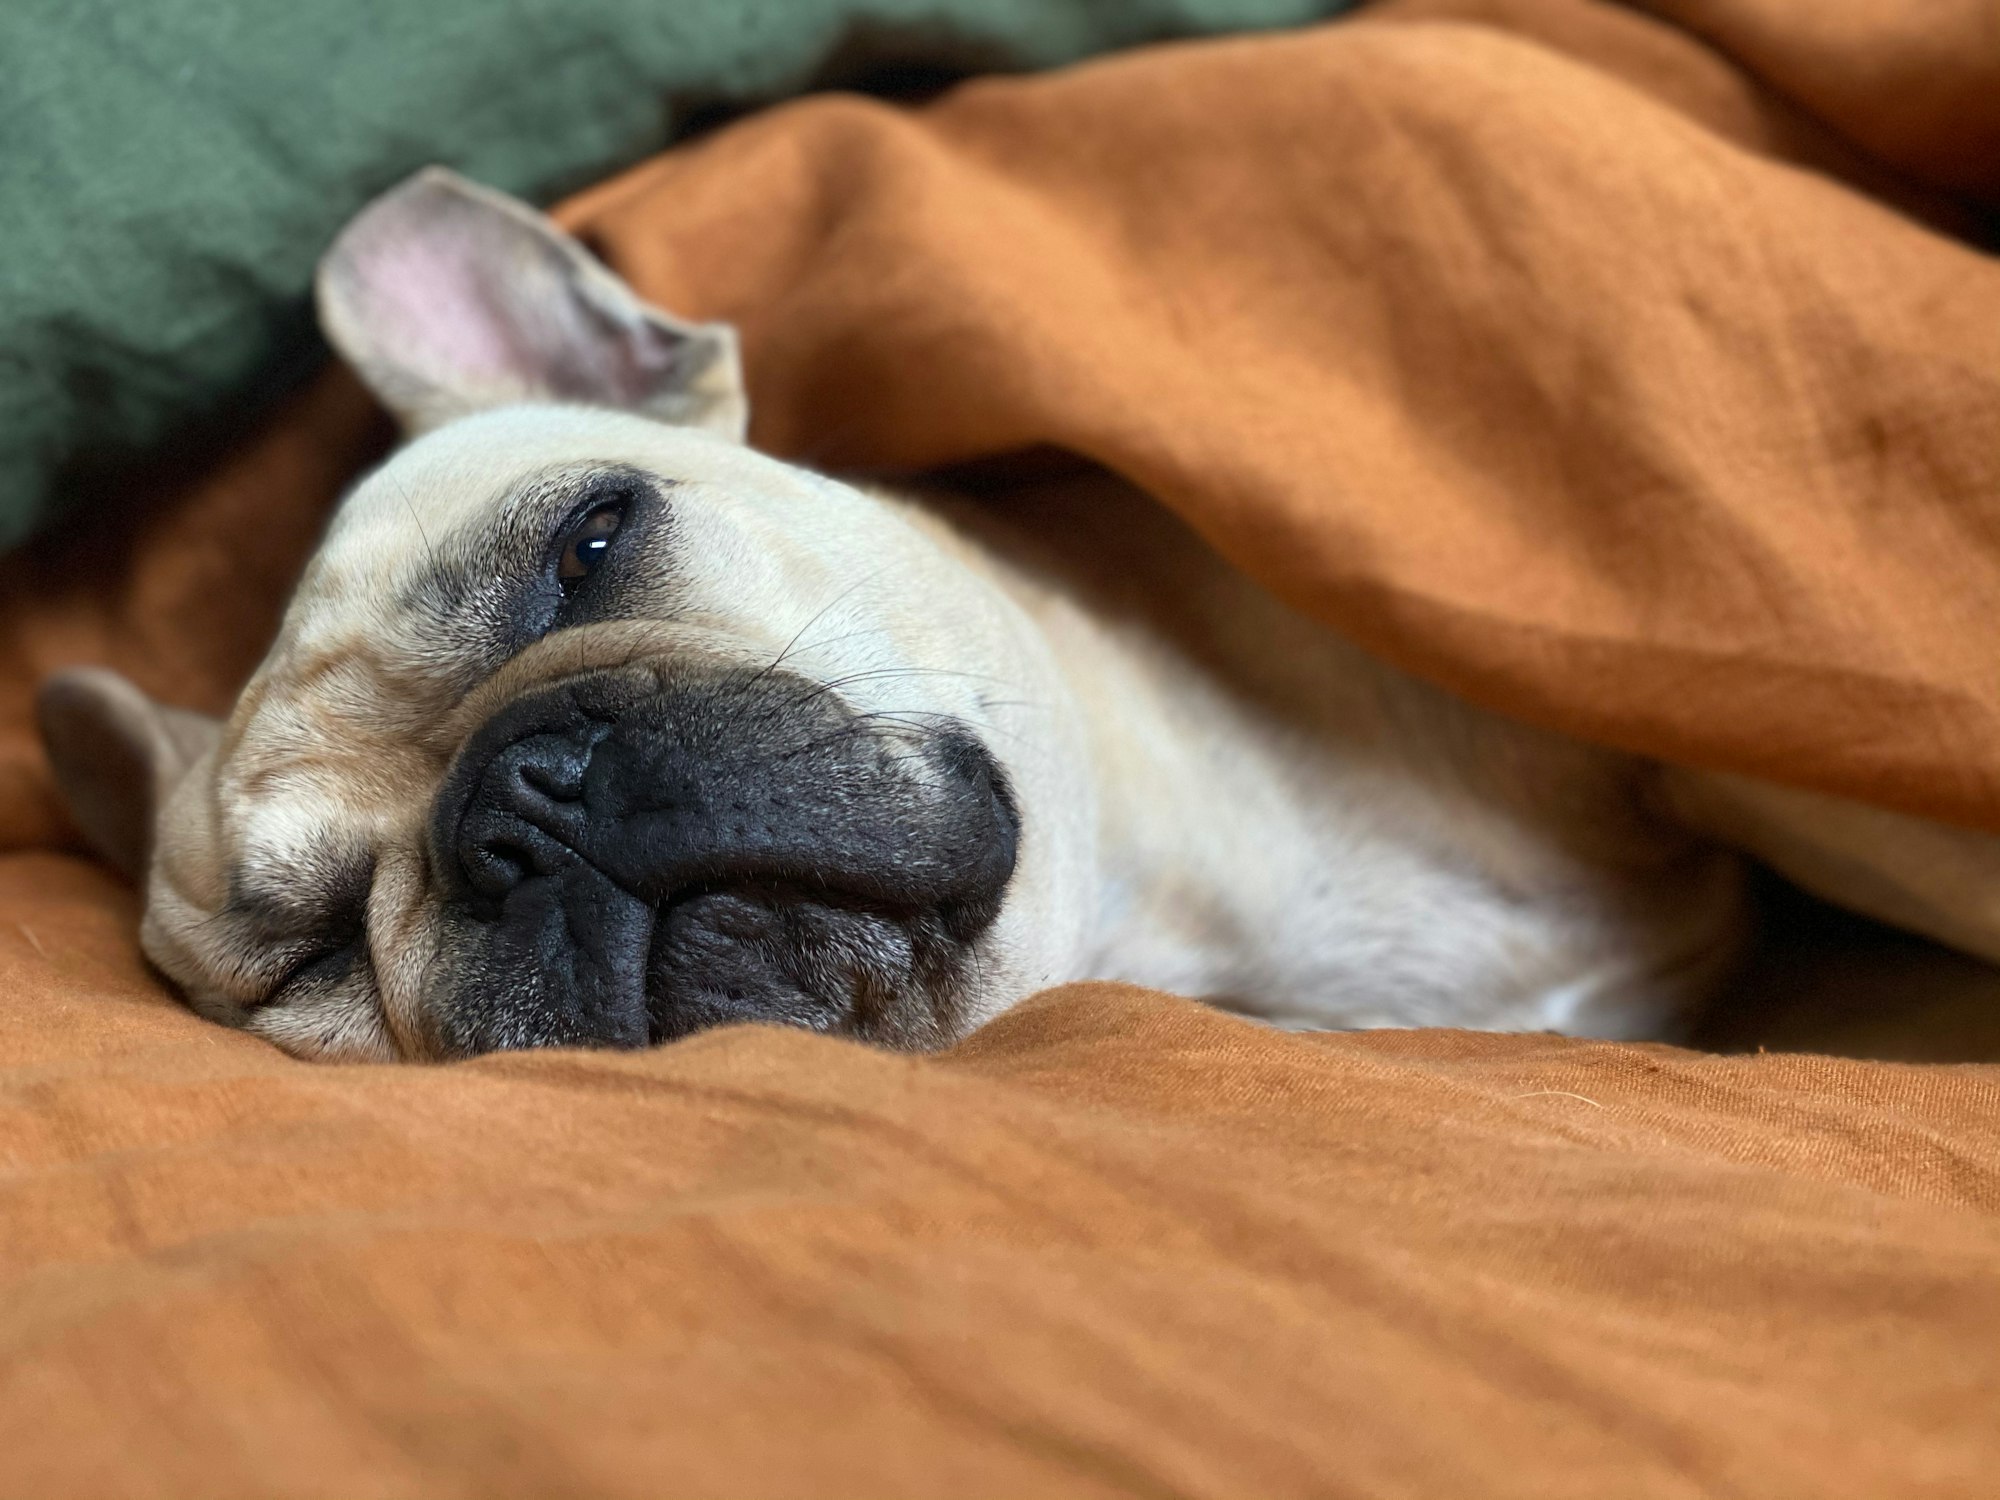 French bulldog falling asleep in a relaxed manner on an orange bedspread